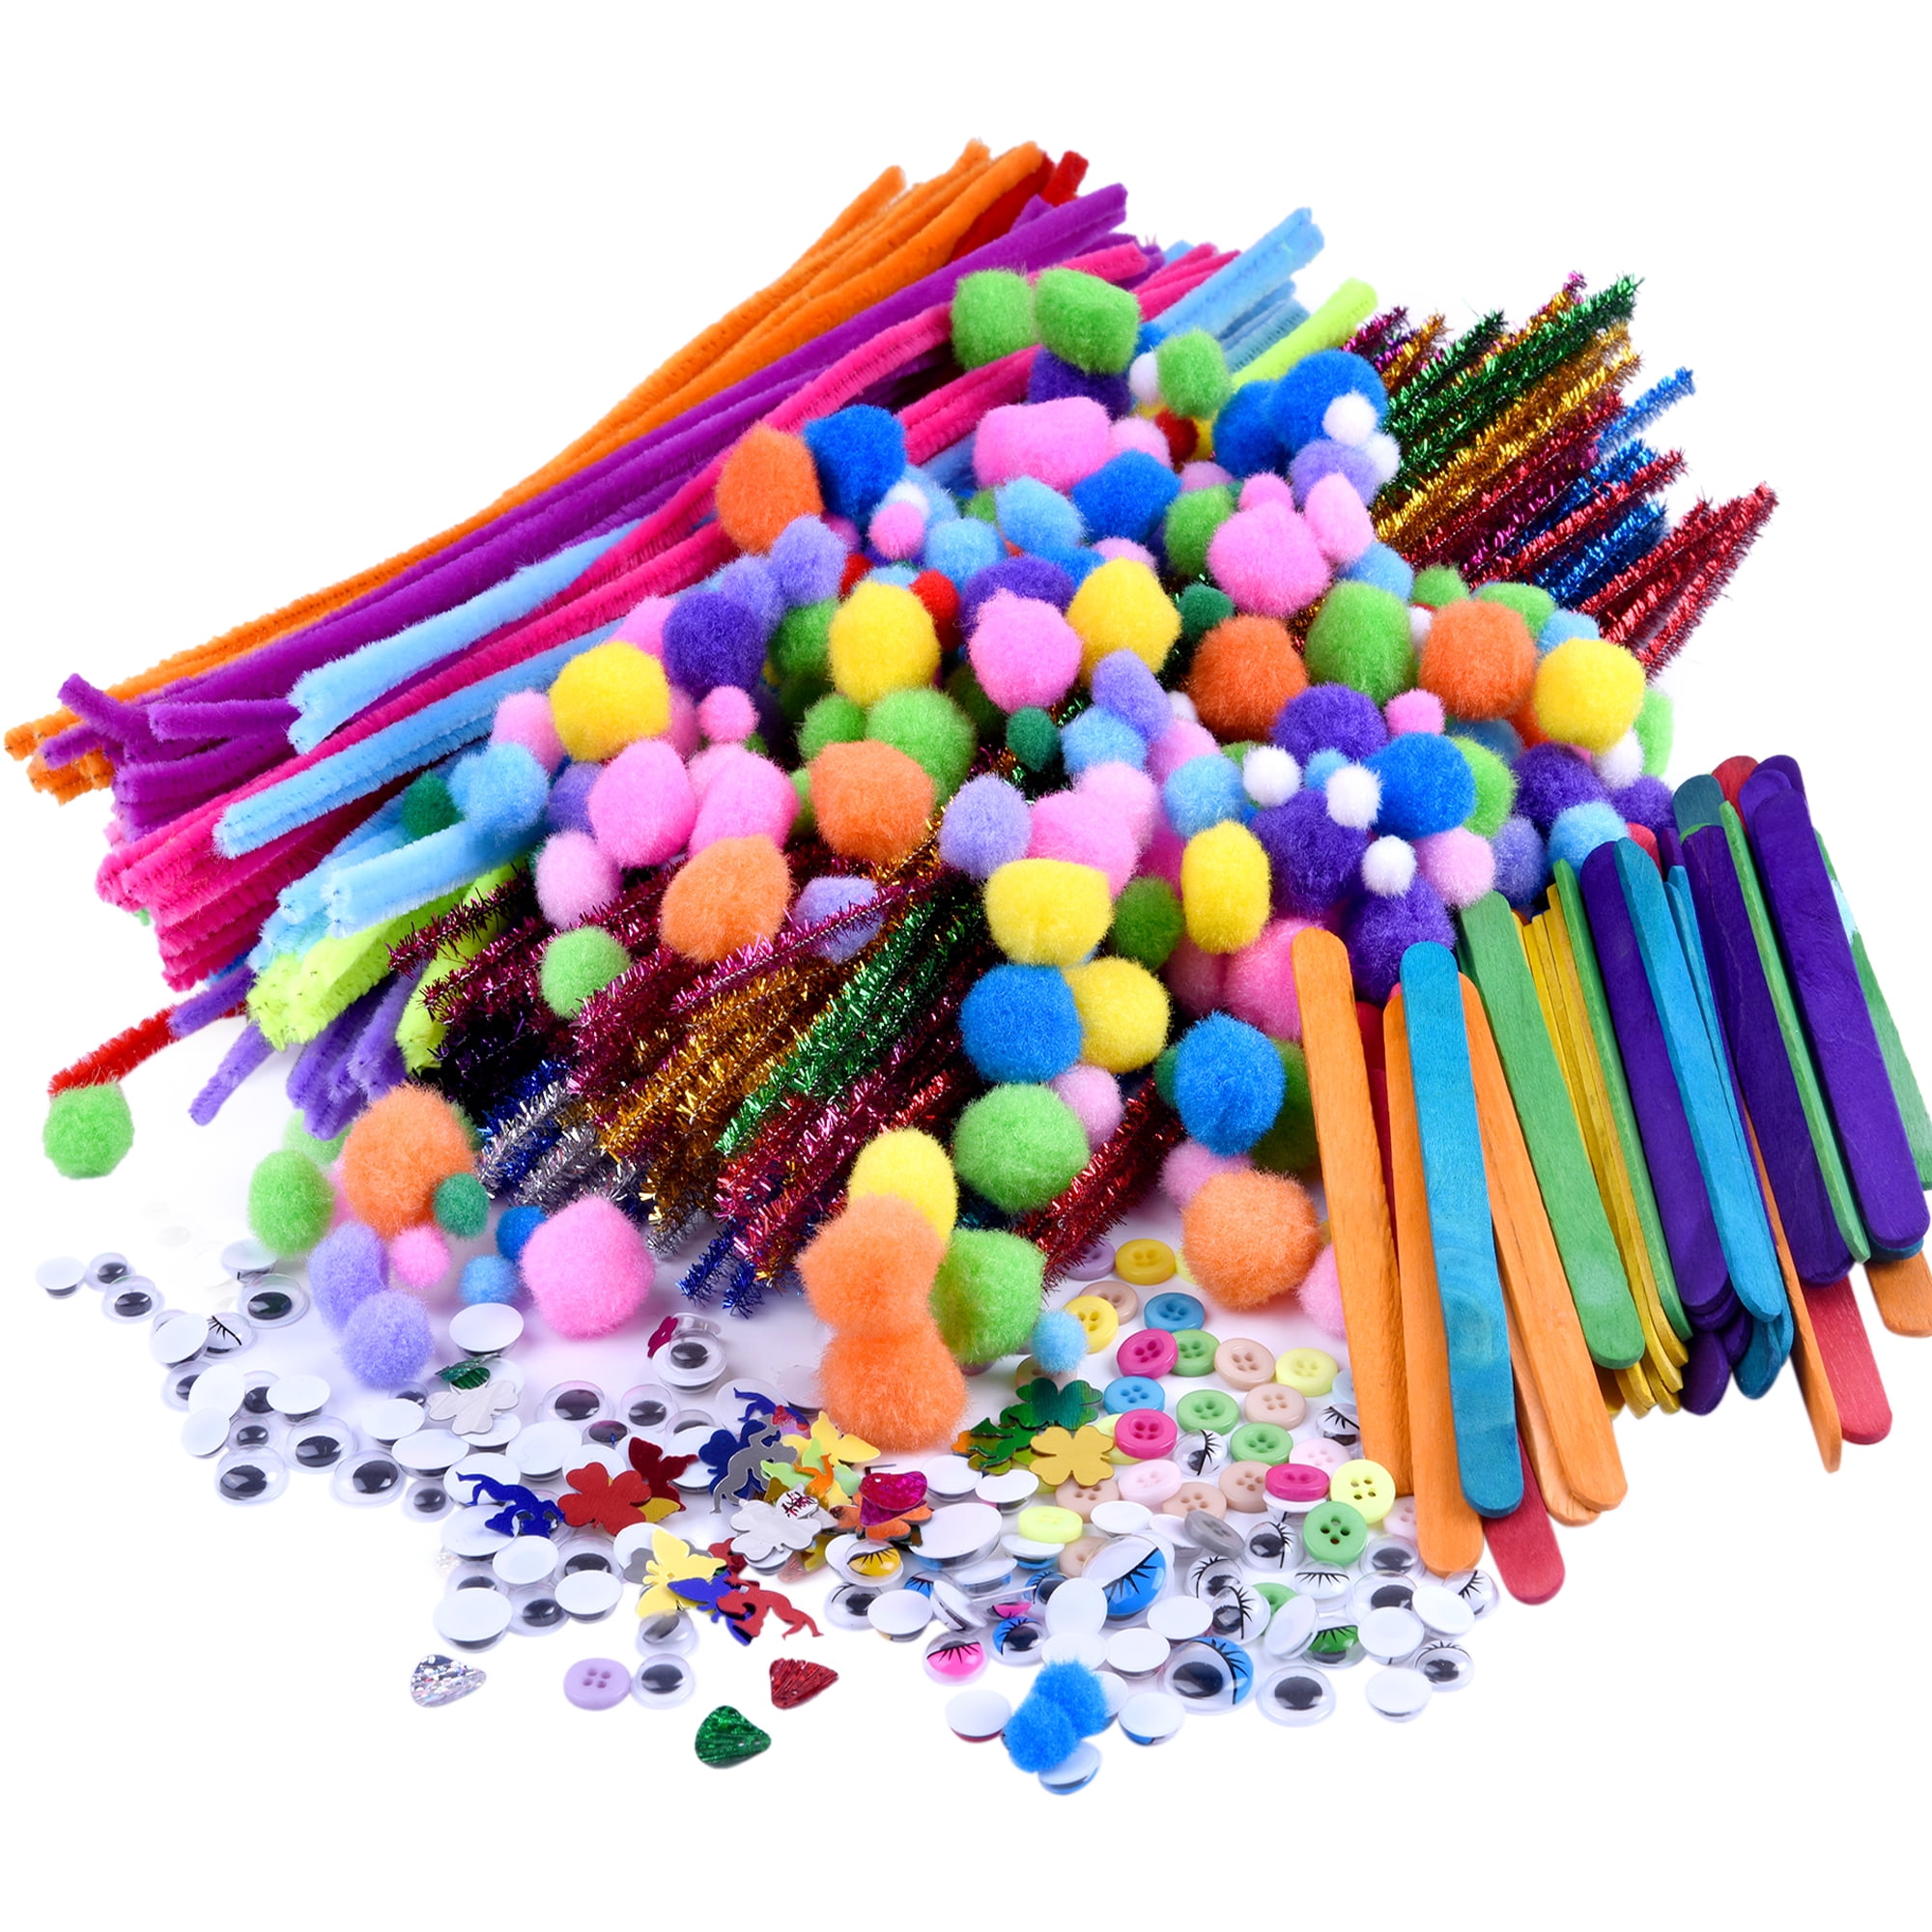 FUNZBO Arts and Crafts Supplies for Kids - 1200+ pcs Craft Supplies, Craft  Kits with Pipe Cleaners, Pom Poms for Crafts & Gloogly Eyes, Crafts for